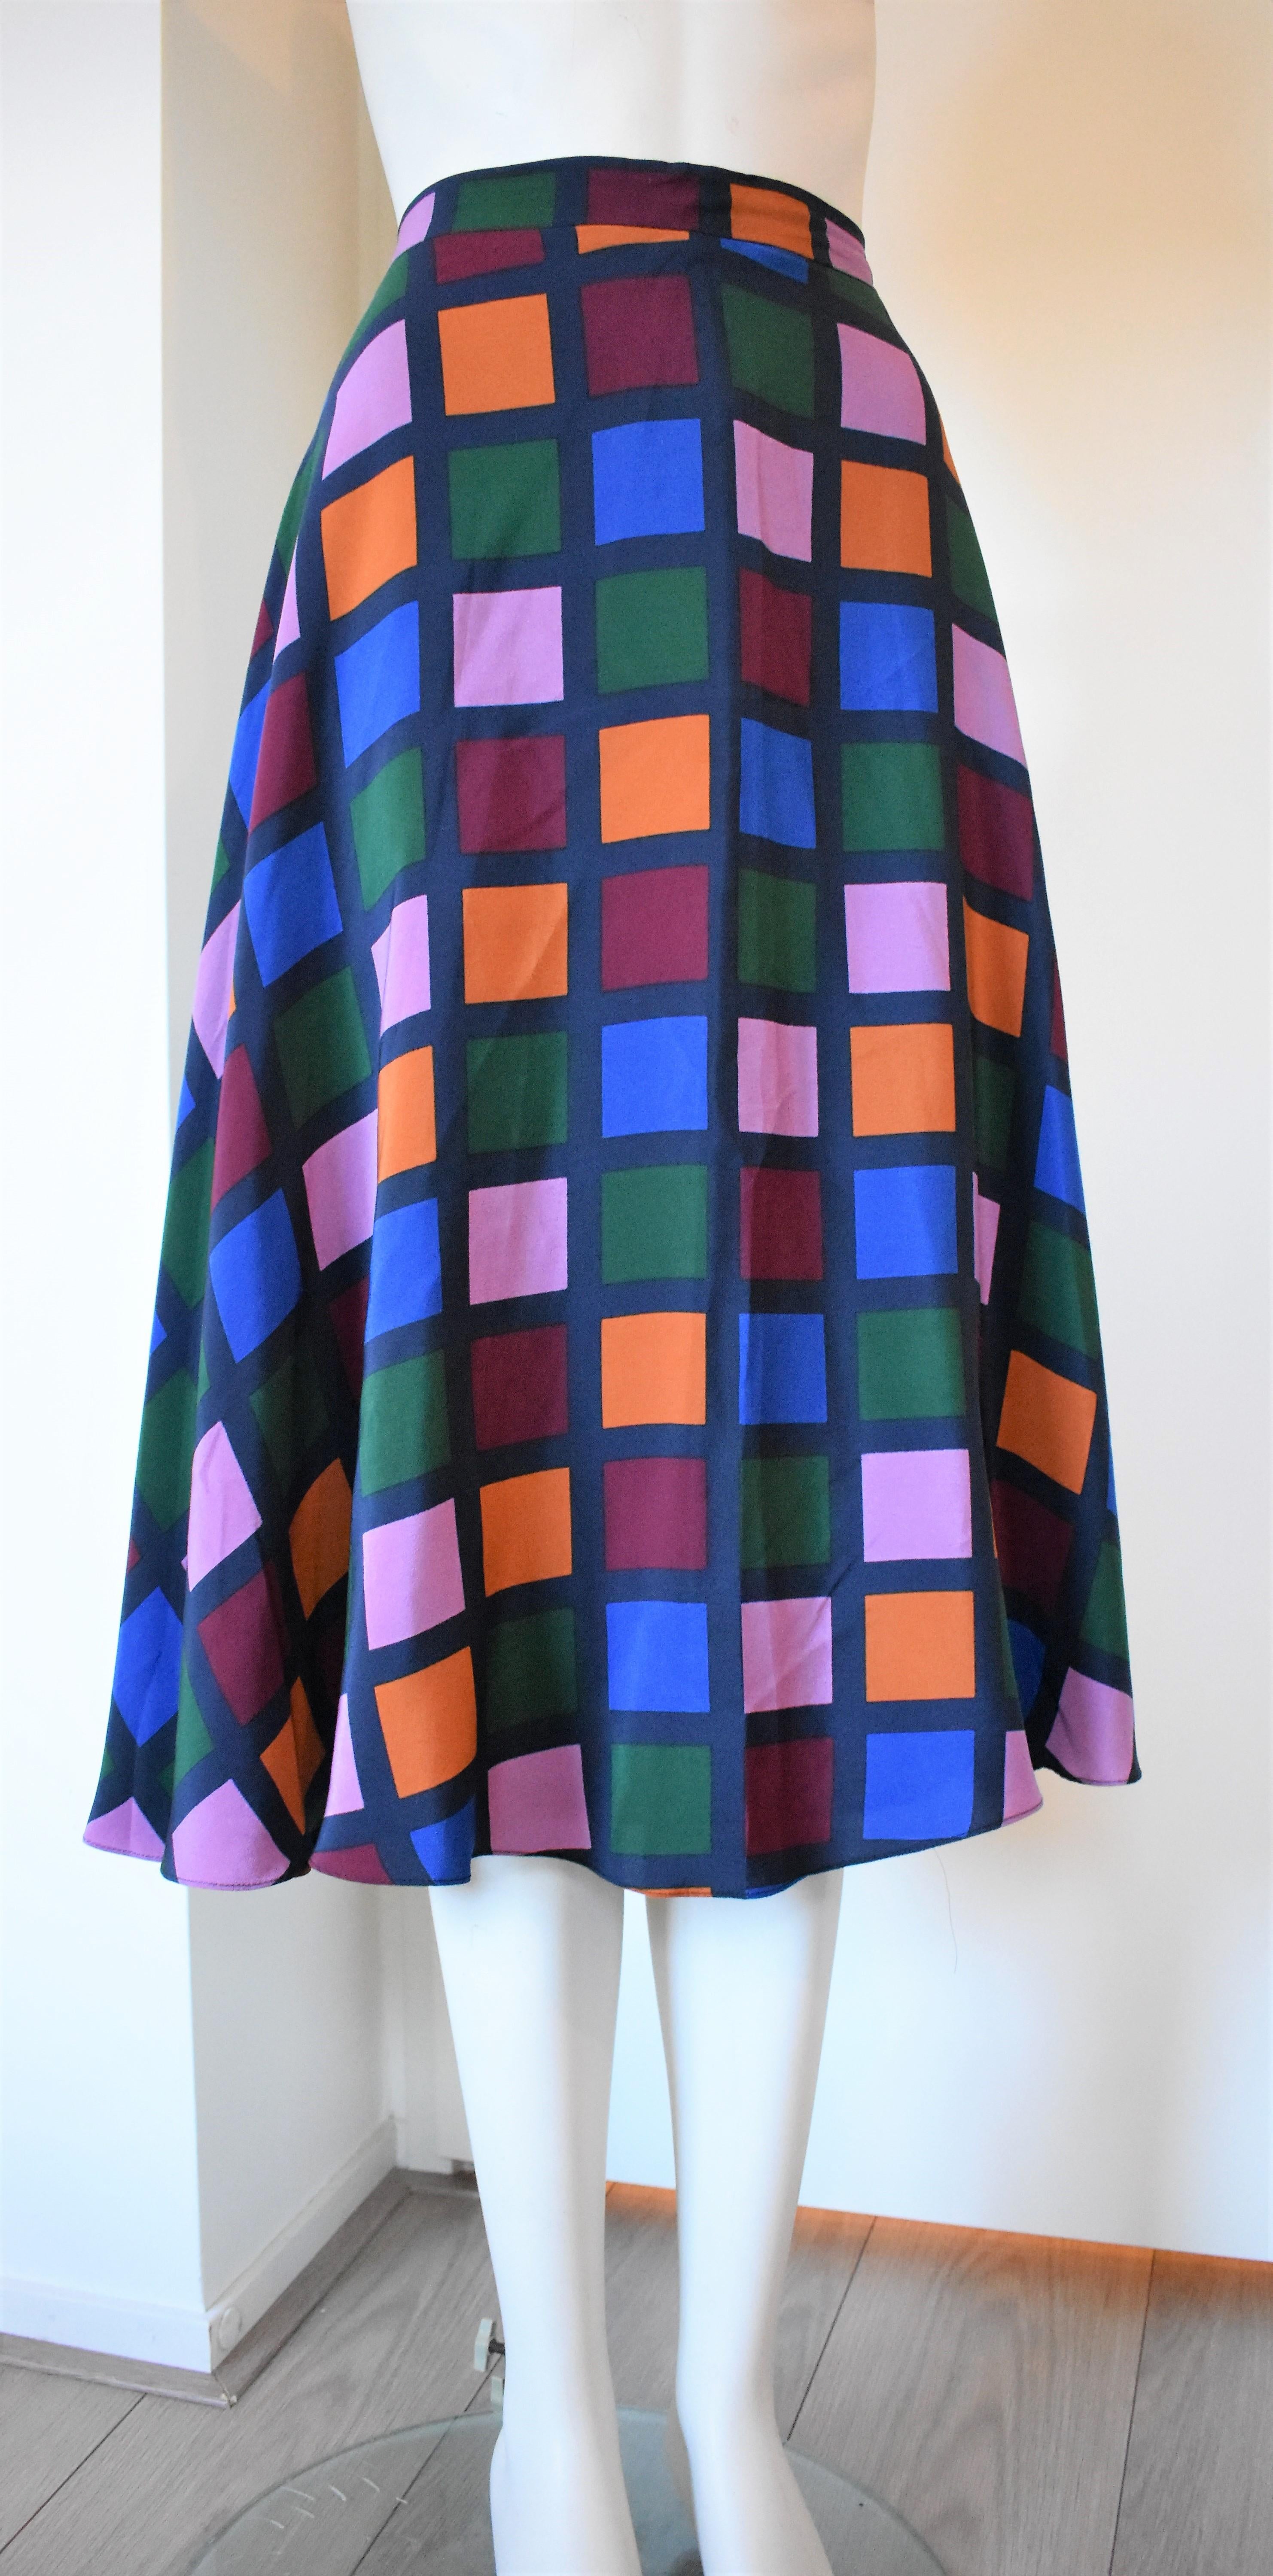 Vintage very colorful checkered harlequin skirt made from pure silk in very good condition. Before shipping, the skirt will be sent to a specialist for a complementary dry cleaning, so it will be perfect and ready to wear upon arrival. 